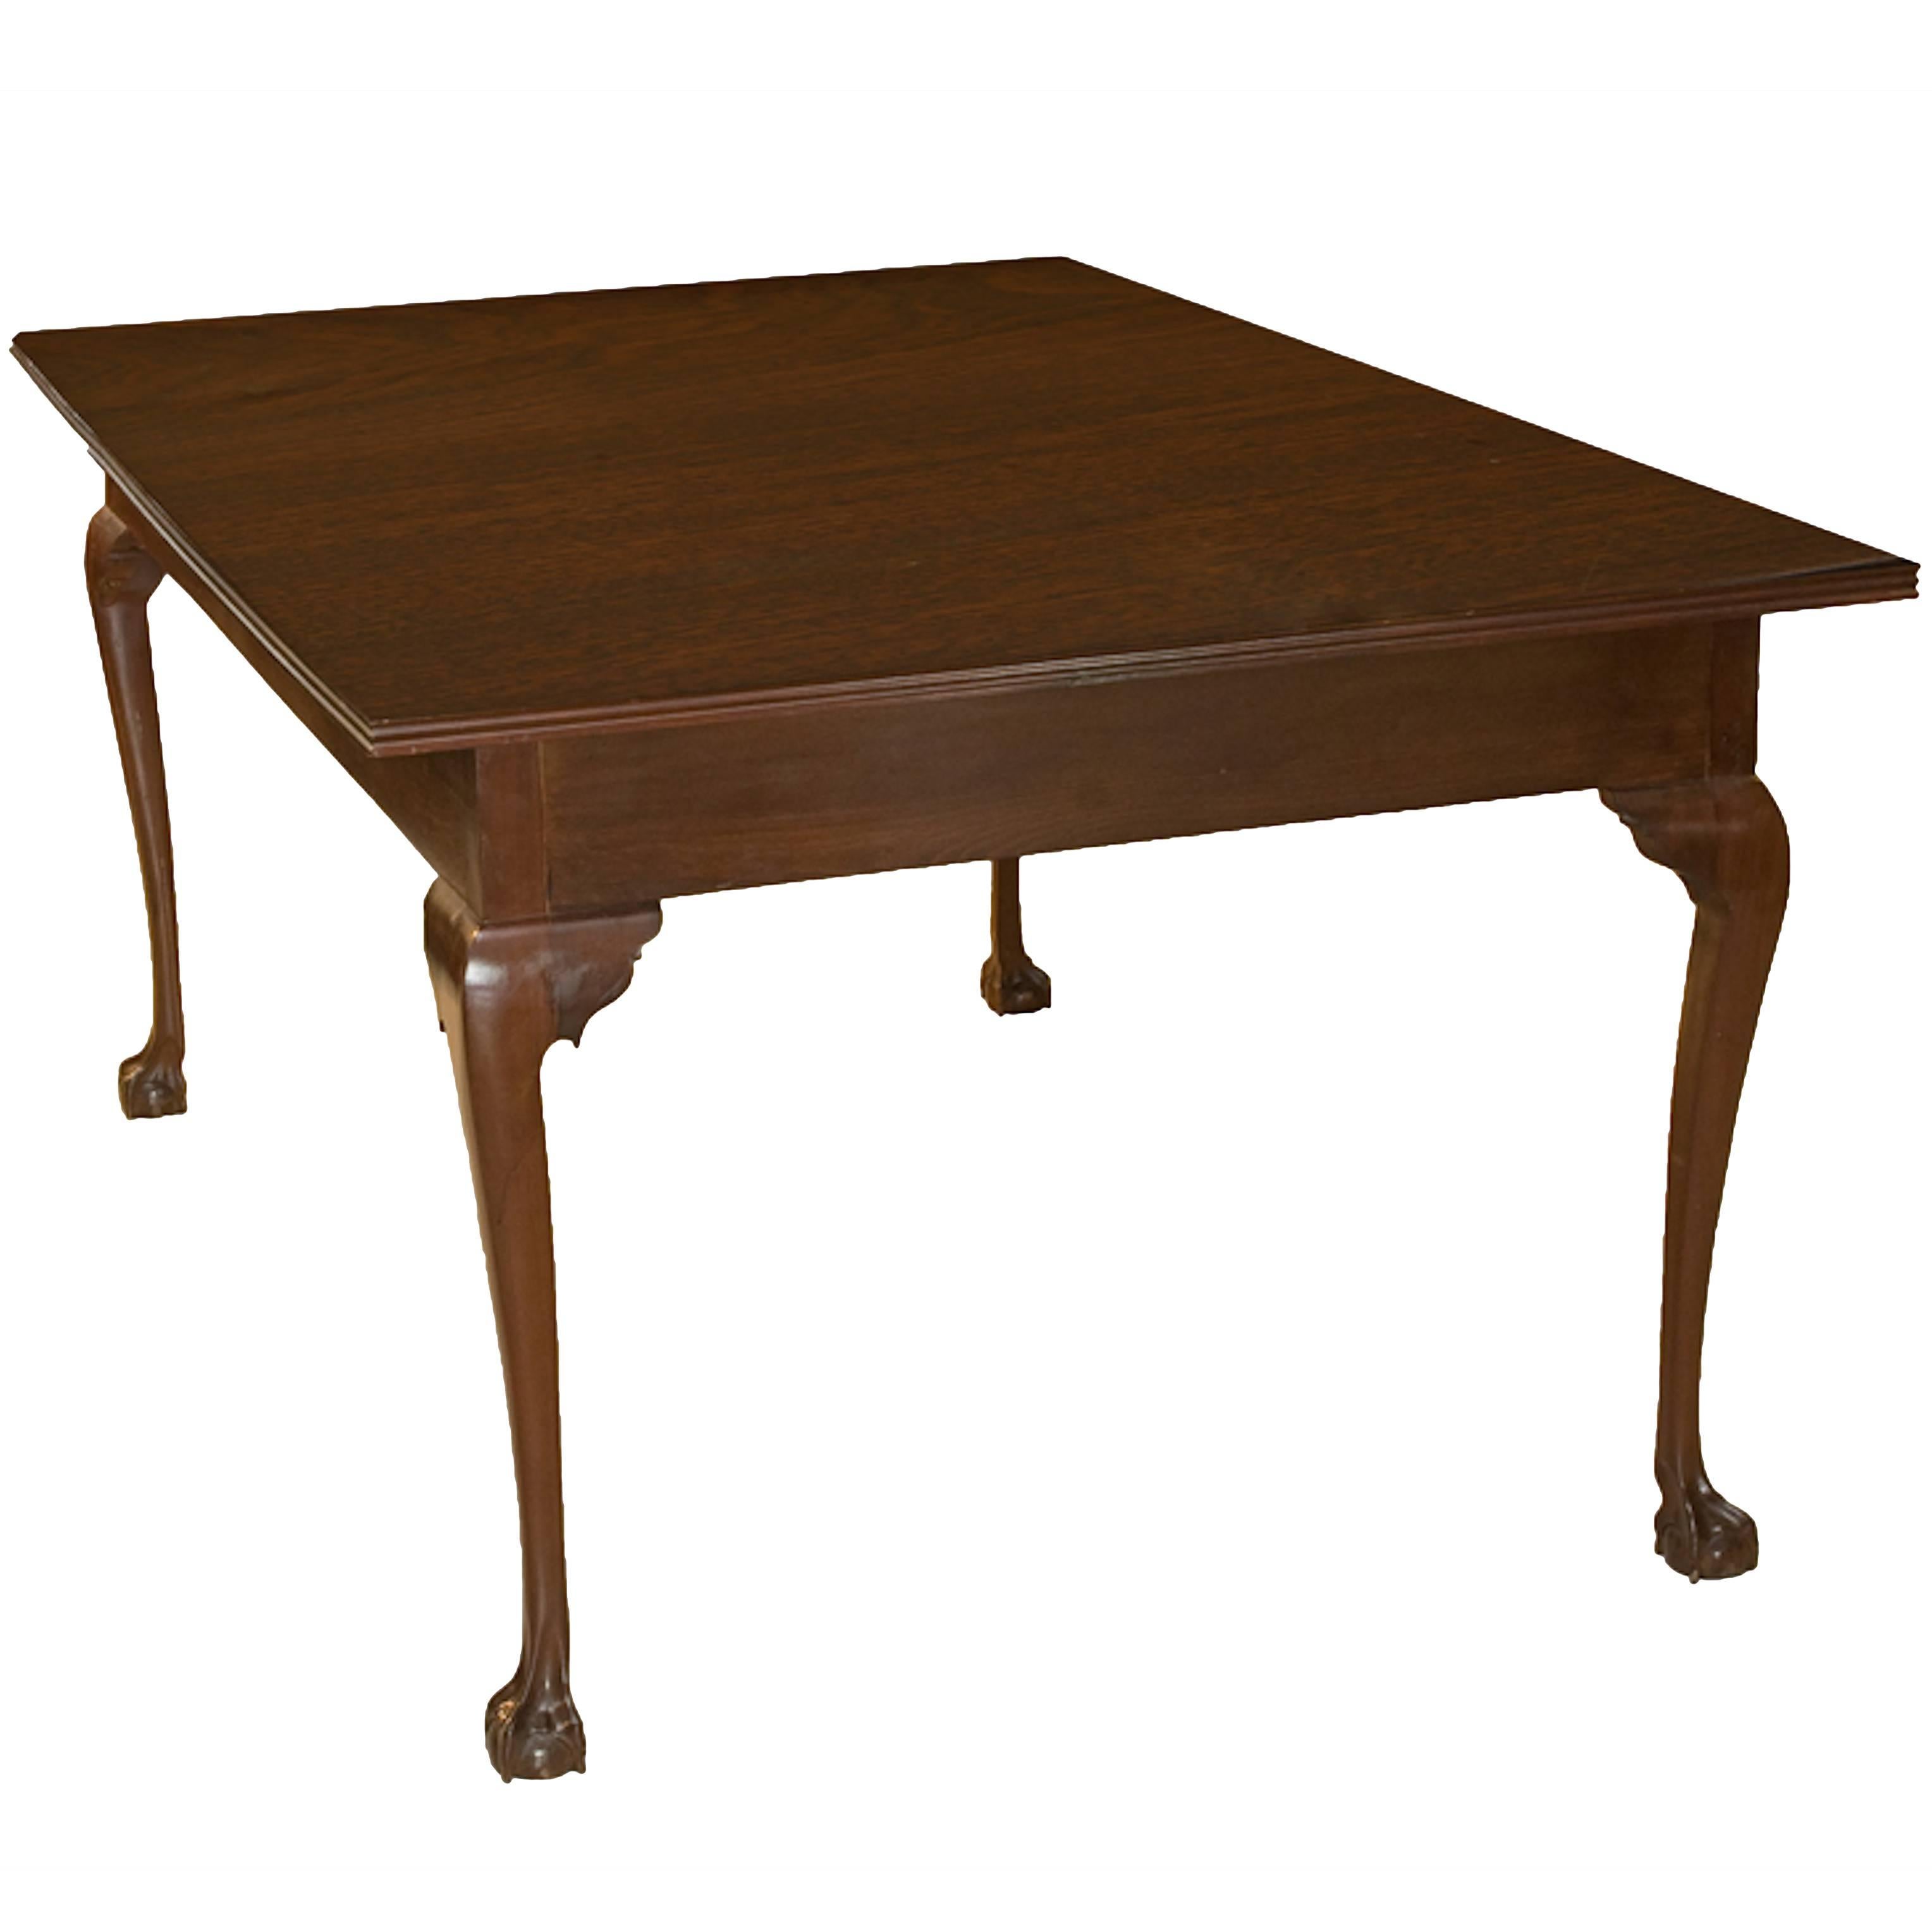 Solid Rosewood and Mahogany Dining Table, Early 19th Century For Sale